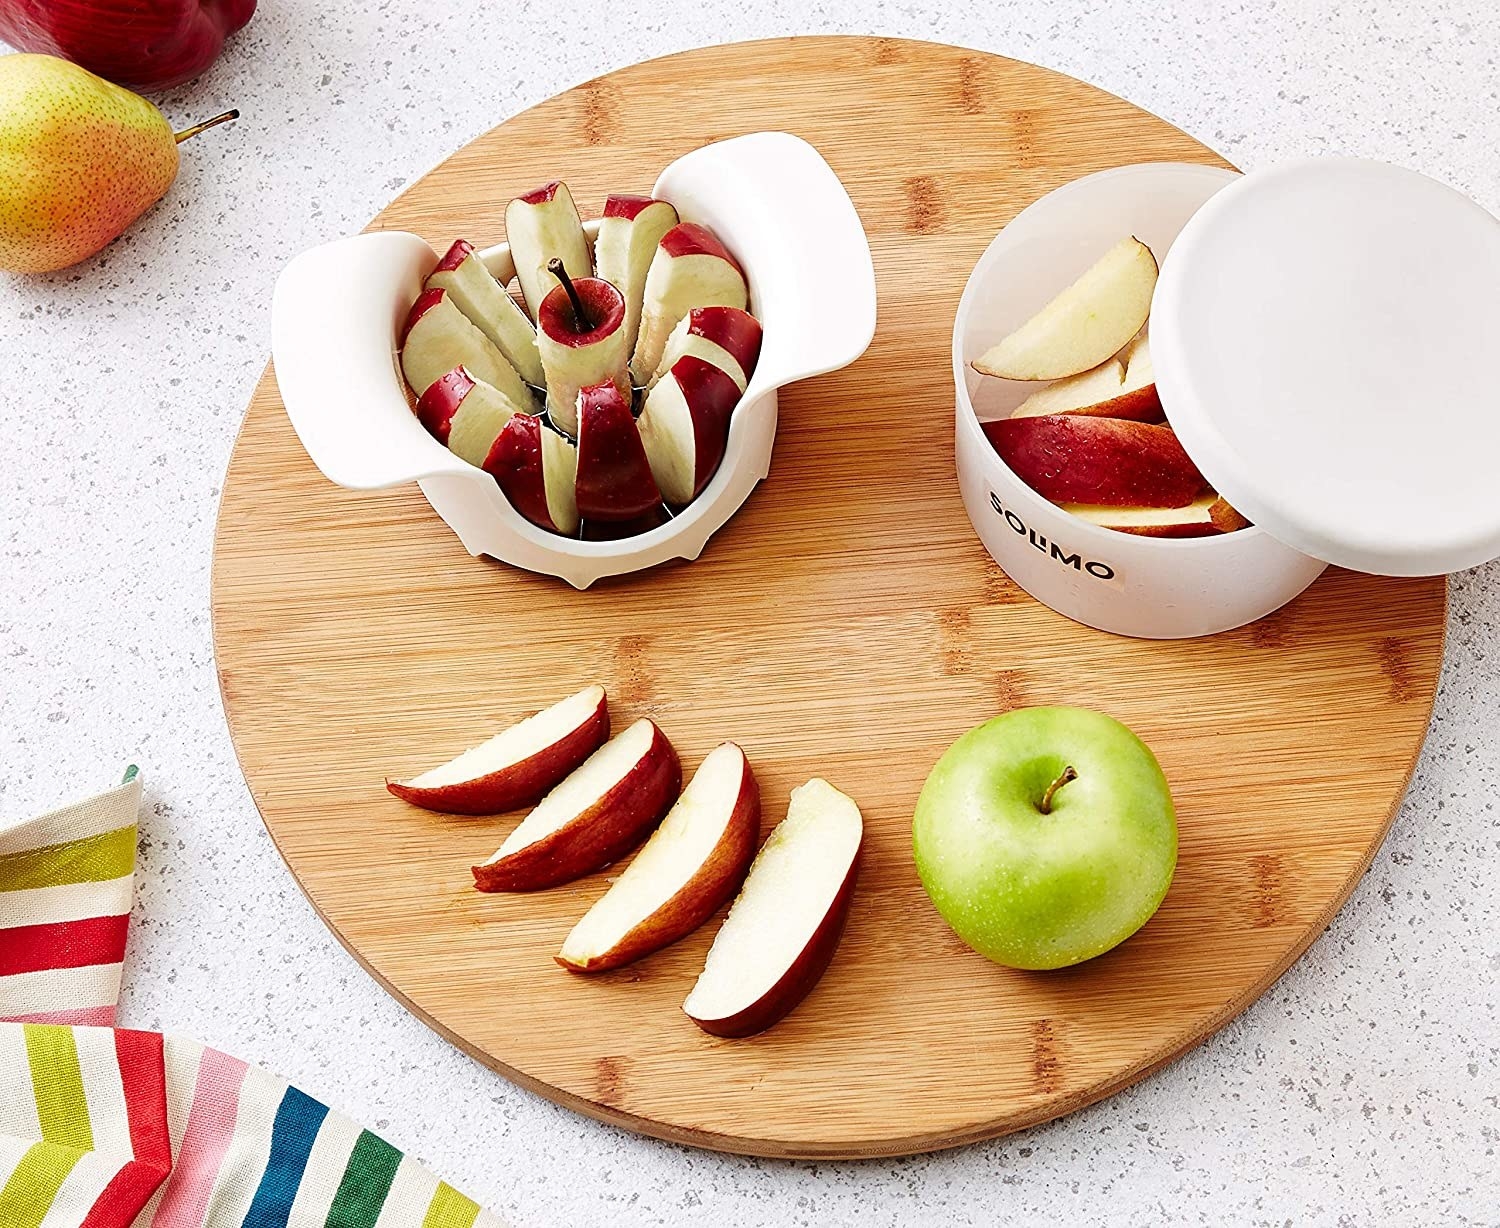 An apple cutter with apple slices and a green apple on a cutting board